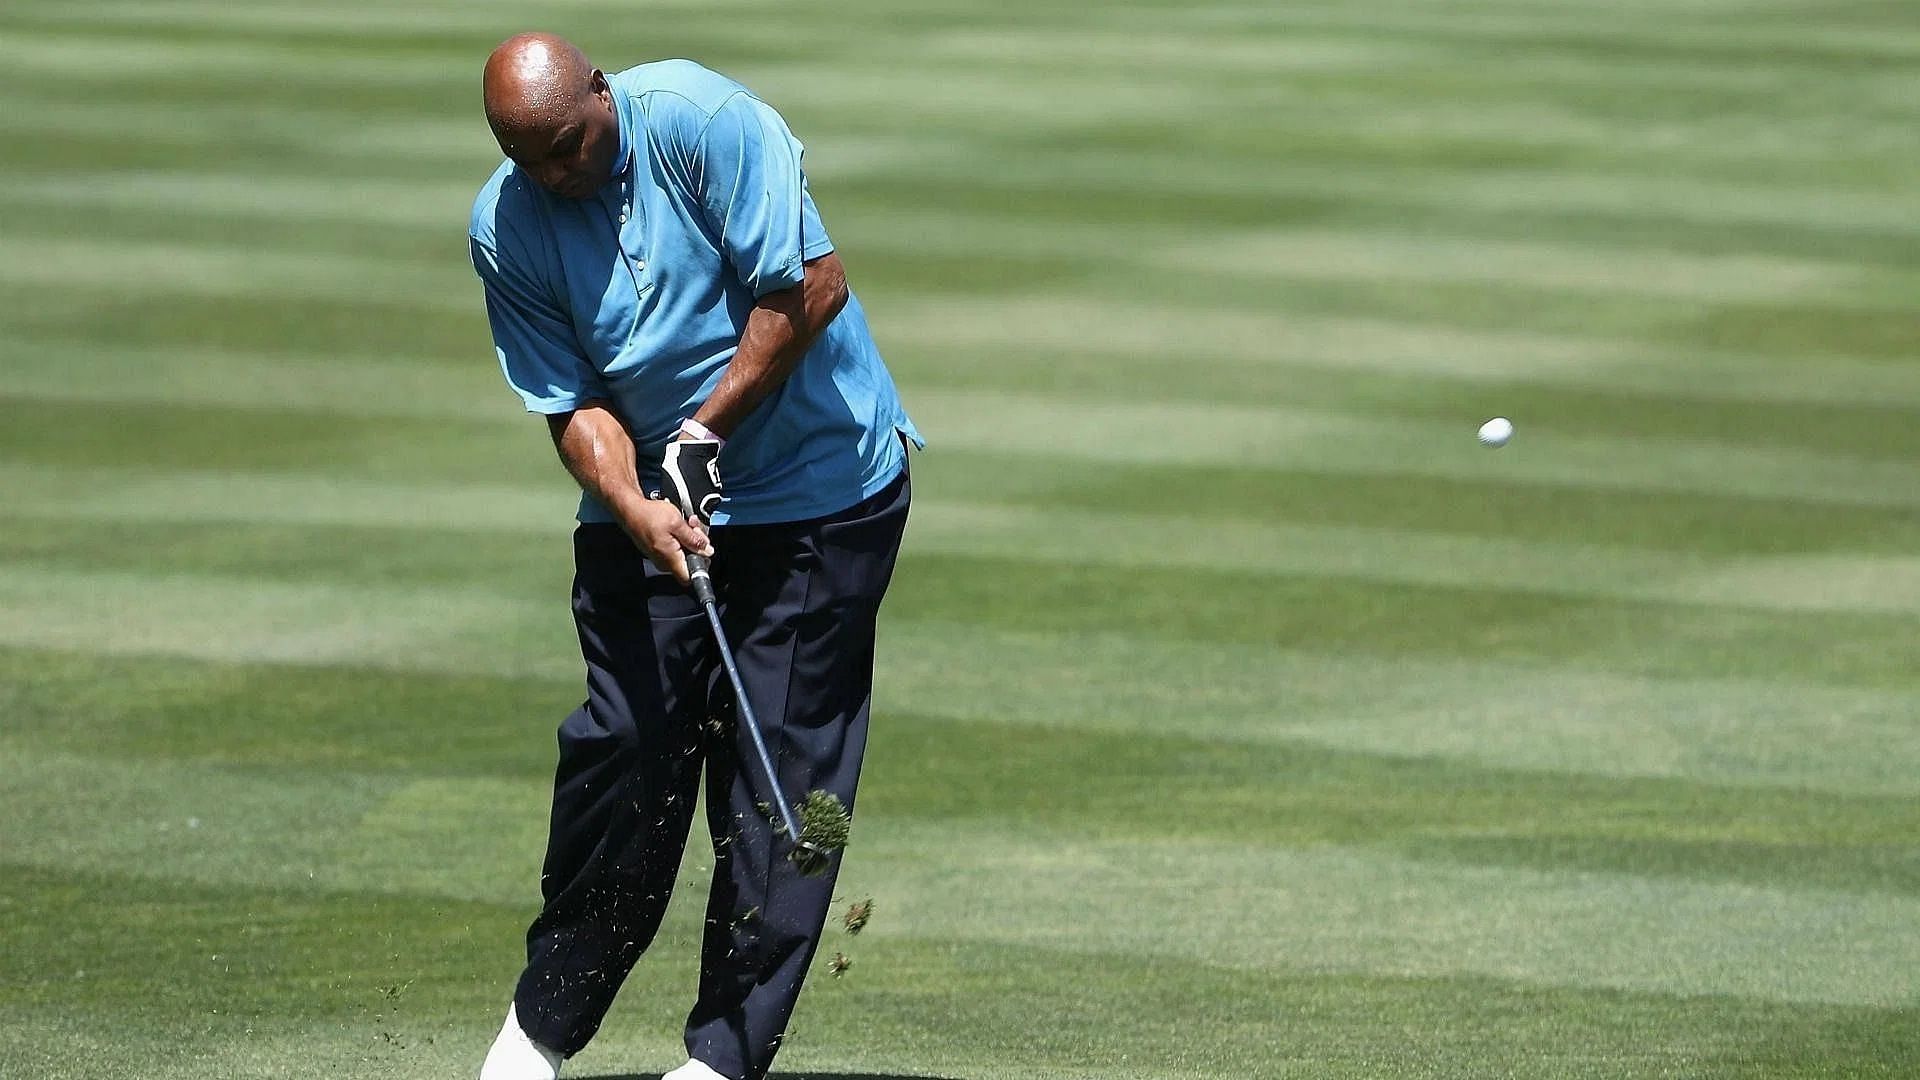 NBA legend Charles Barkley has developed a special liking to golf since retiring from basketball.